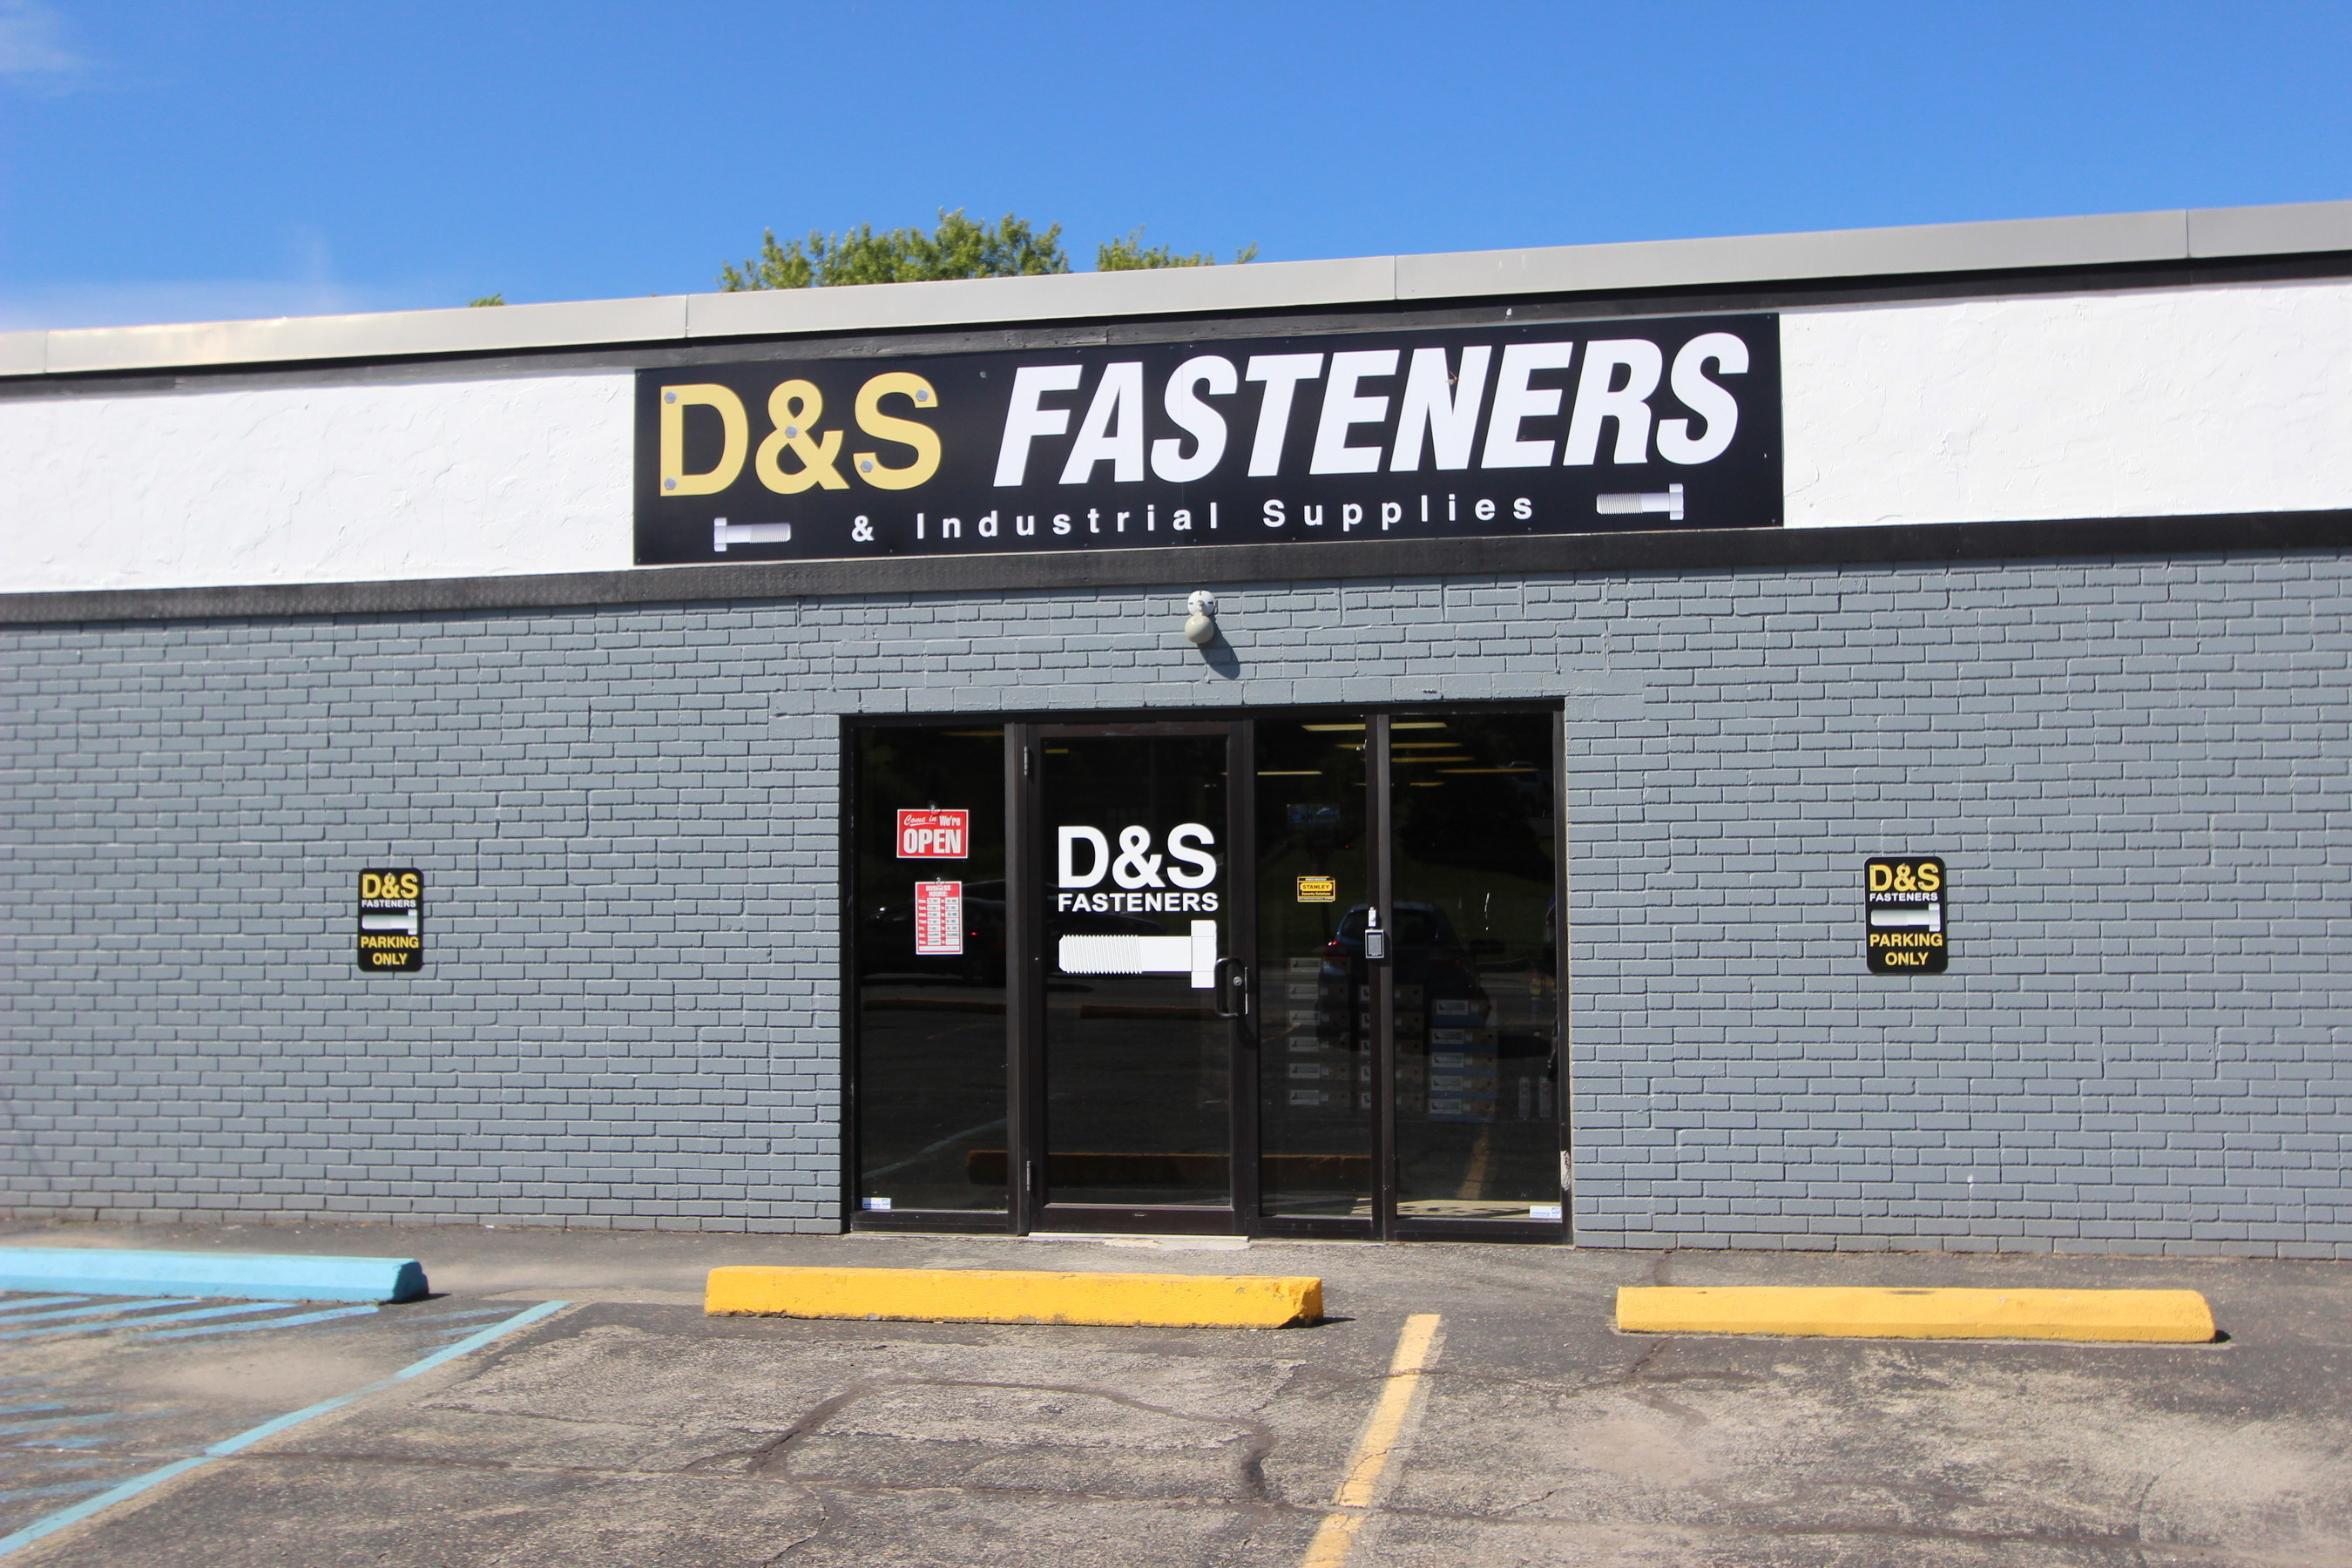 The new D&S Industrial Fasteners retail storefront in Washington, Pa. will be celebrating its grand opening on August 18th and 19th, 2016.